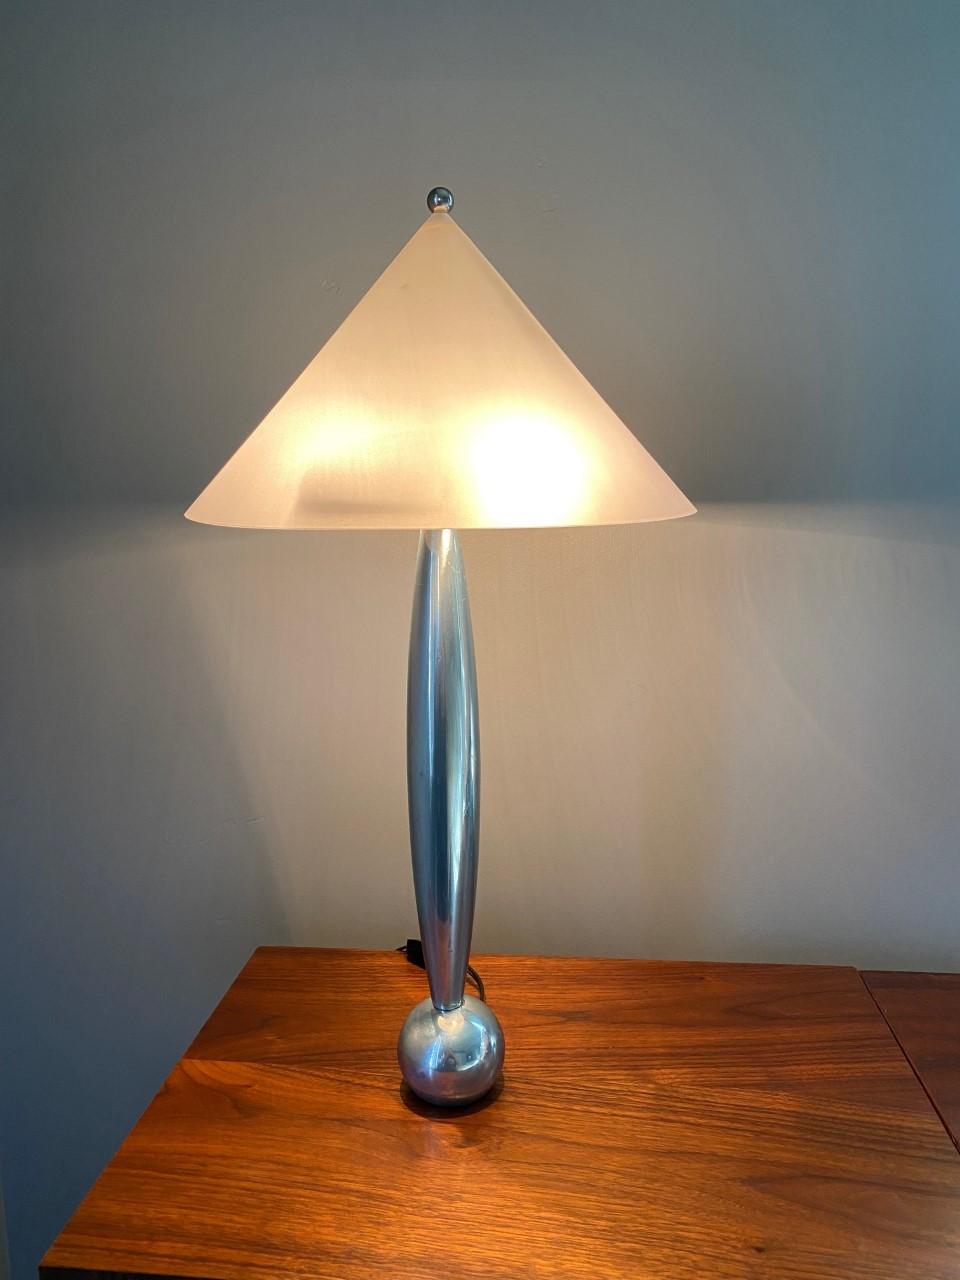 Pair of vintage Space Age cast aluminum table lamps, circa 1970s. A sleek and minimal cast aluminum form with a convex body terminating in a weighted spherical base. Paired with a polymer conical shade. The effect transcends it’s time. The lamp is